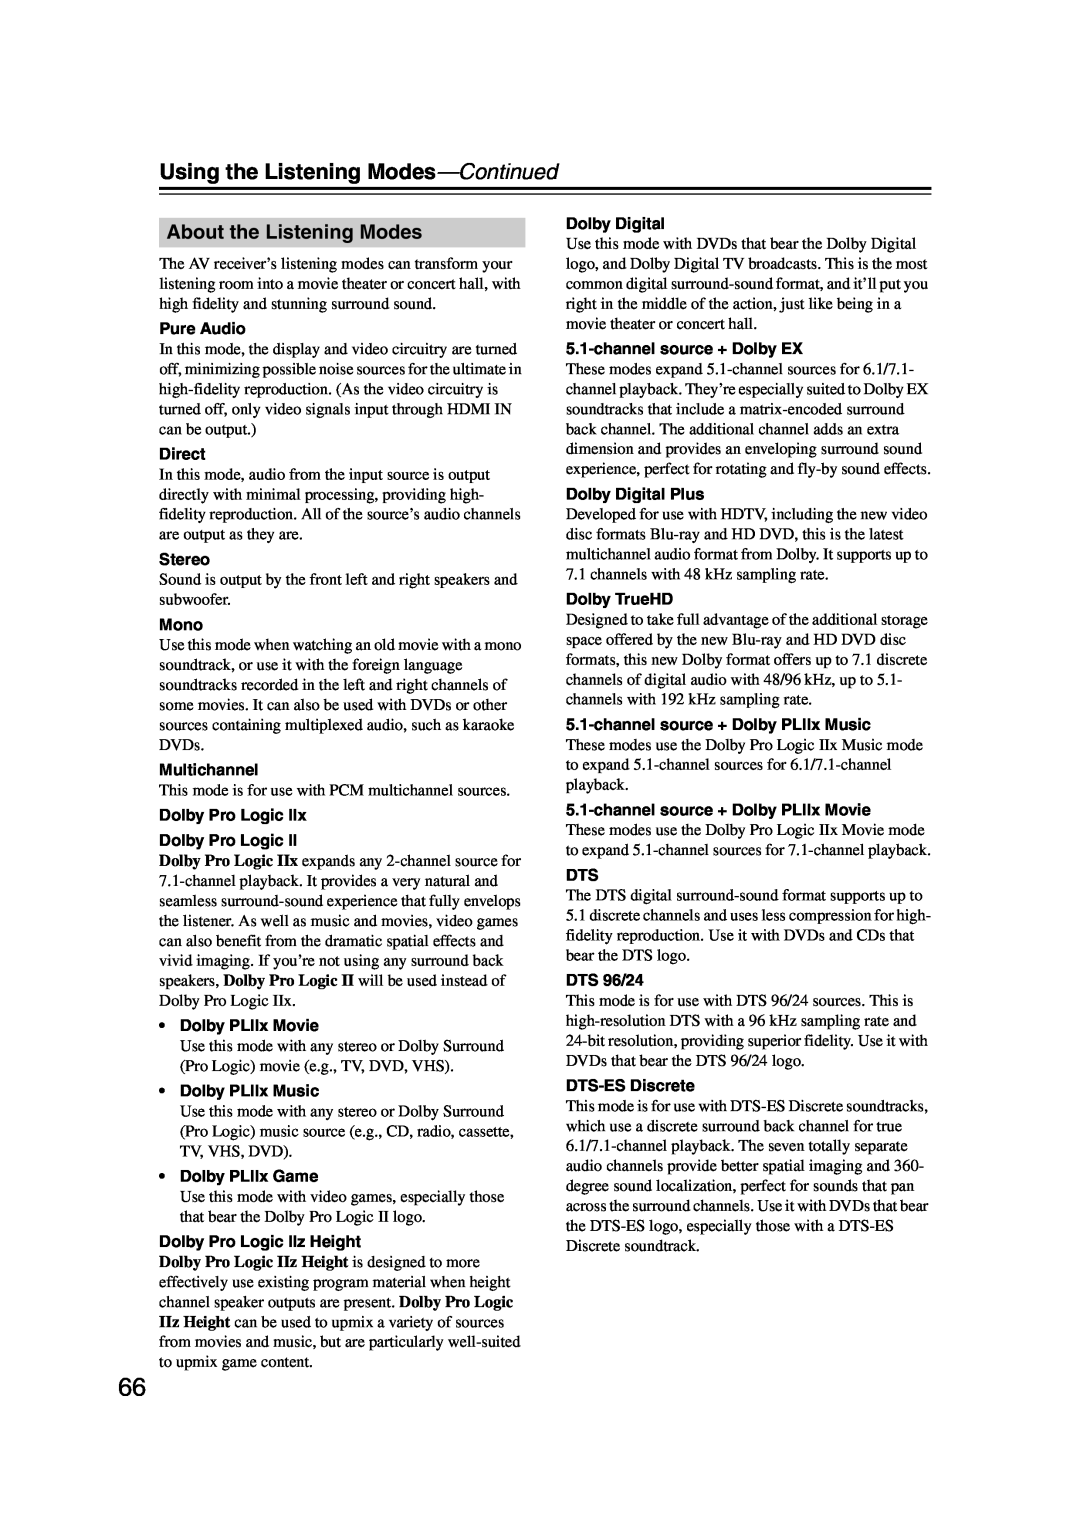 Onkyo 29344937, HT-S6200 instruction manual About the Listening Modes, Using the Listening Modes-Continued 